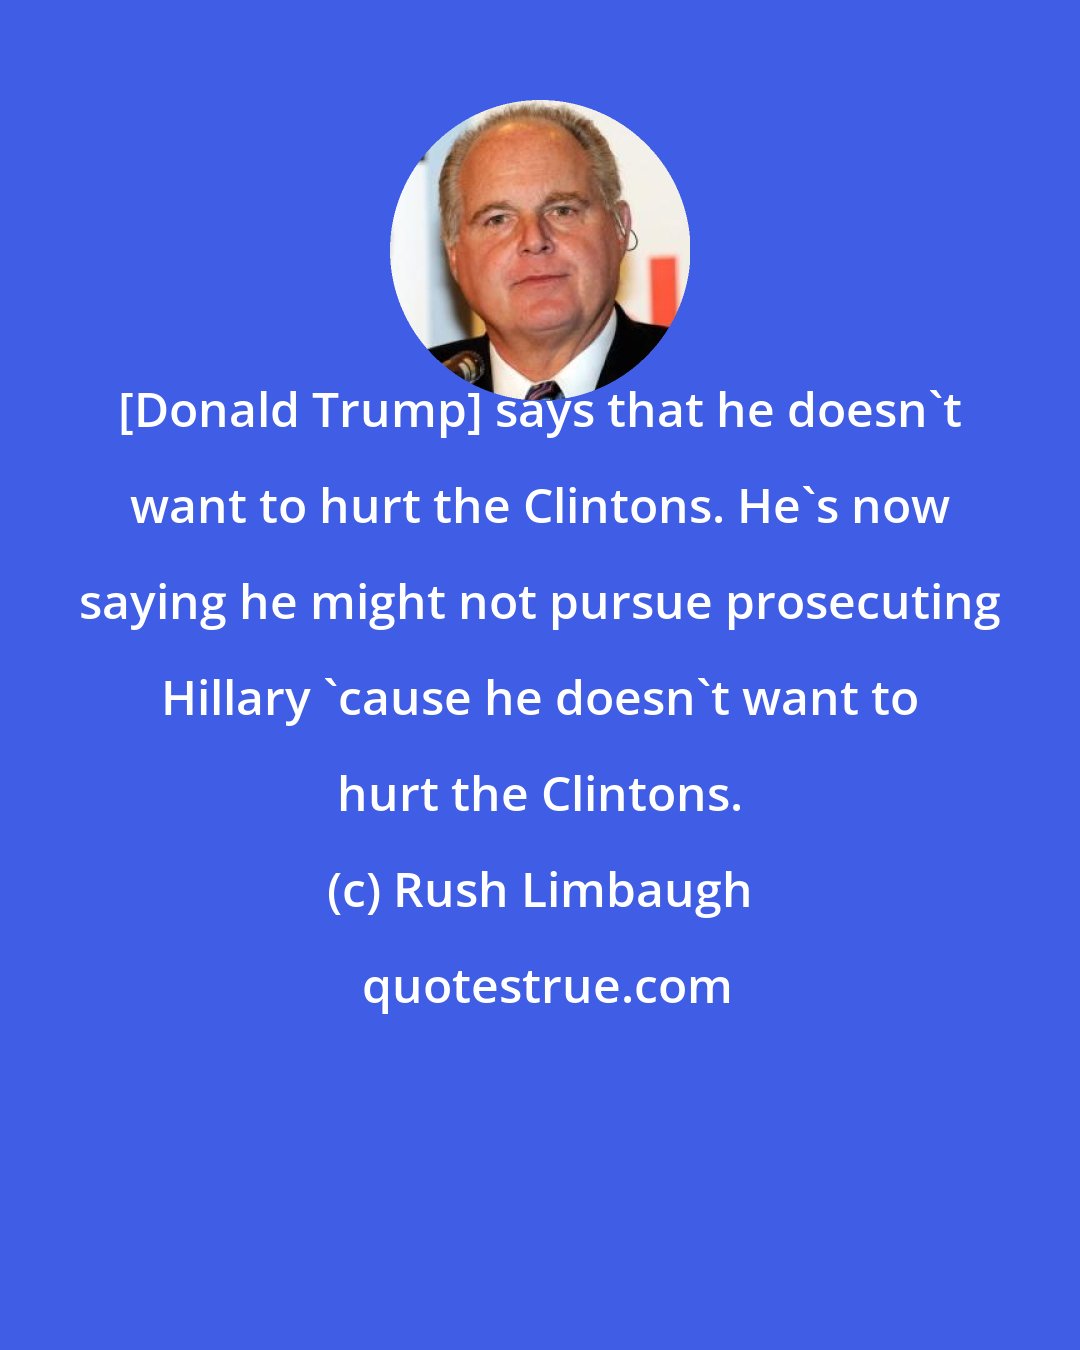 Rush Limbaugh: [Donald Trump] says that he doesn't want to hurt the Clintons. He's now saying he might not pursue prosecuting Hillary 'cause he doesn't want to hurt the Clintons.